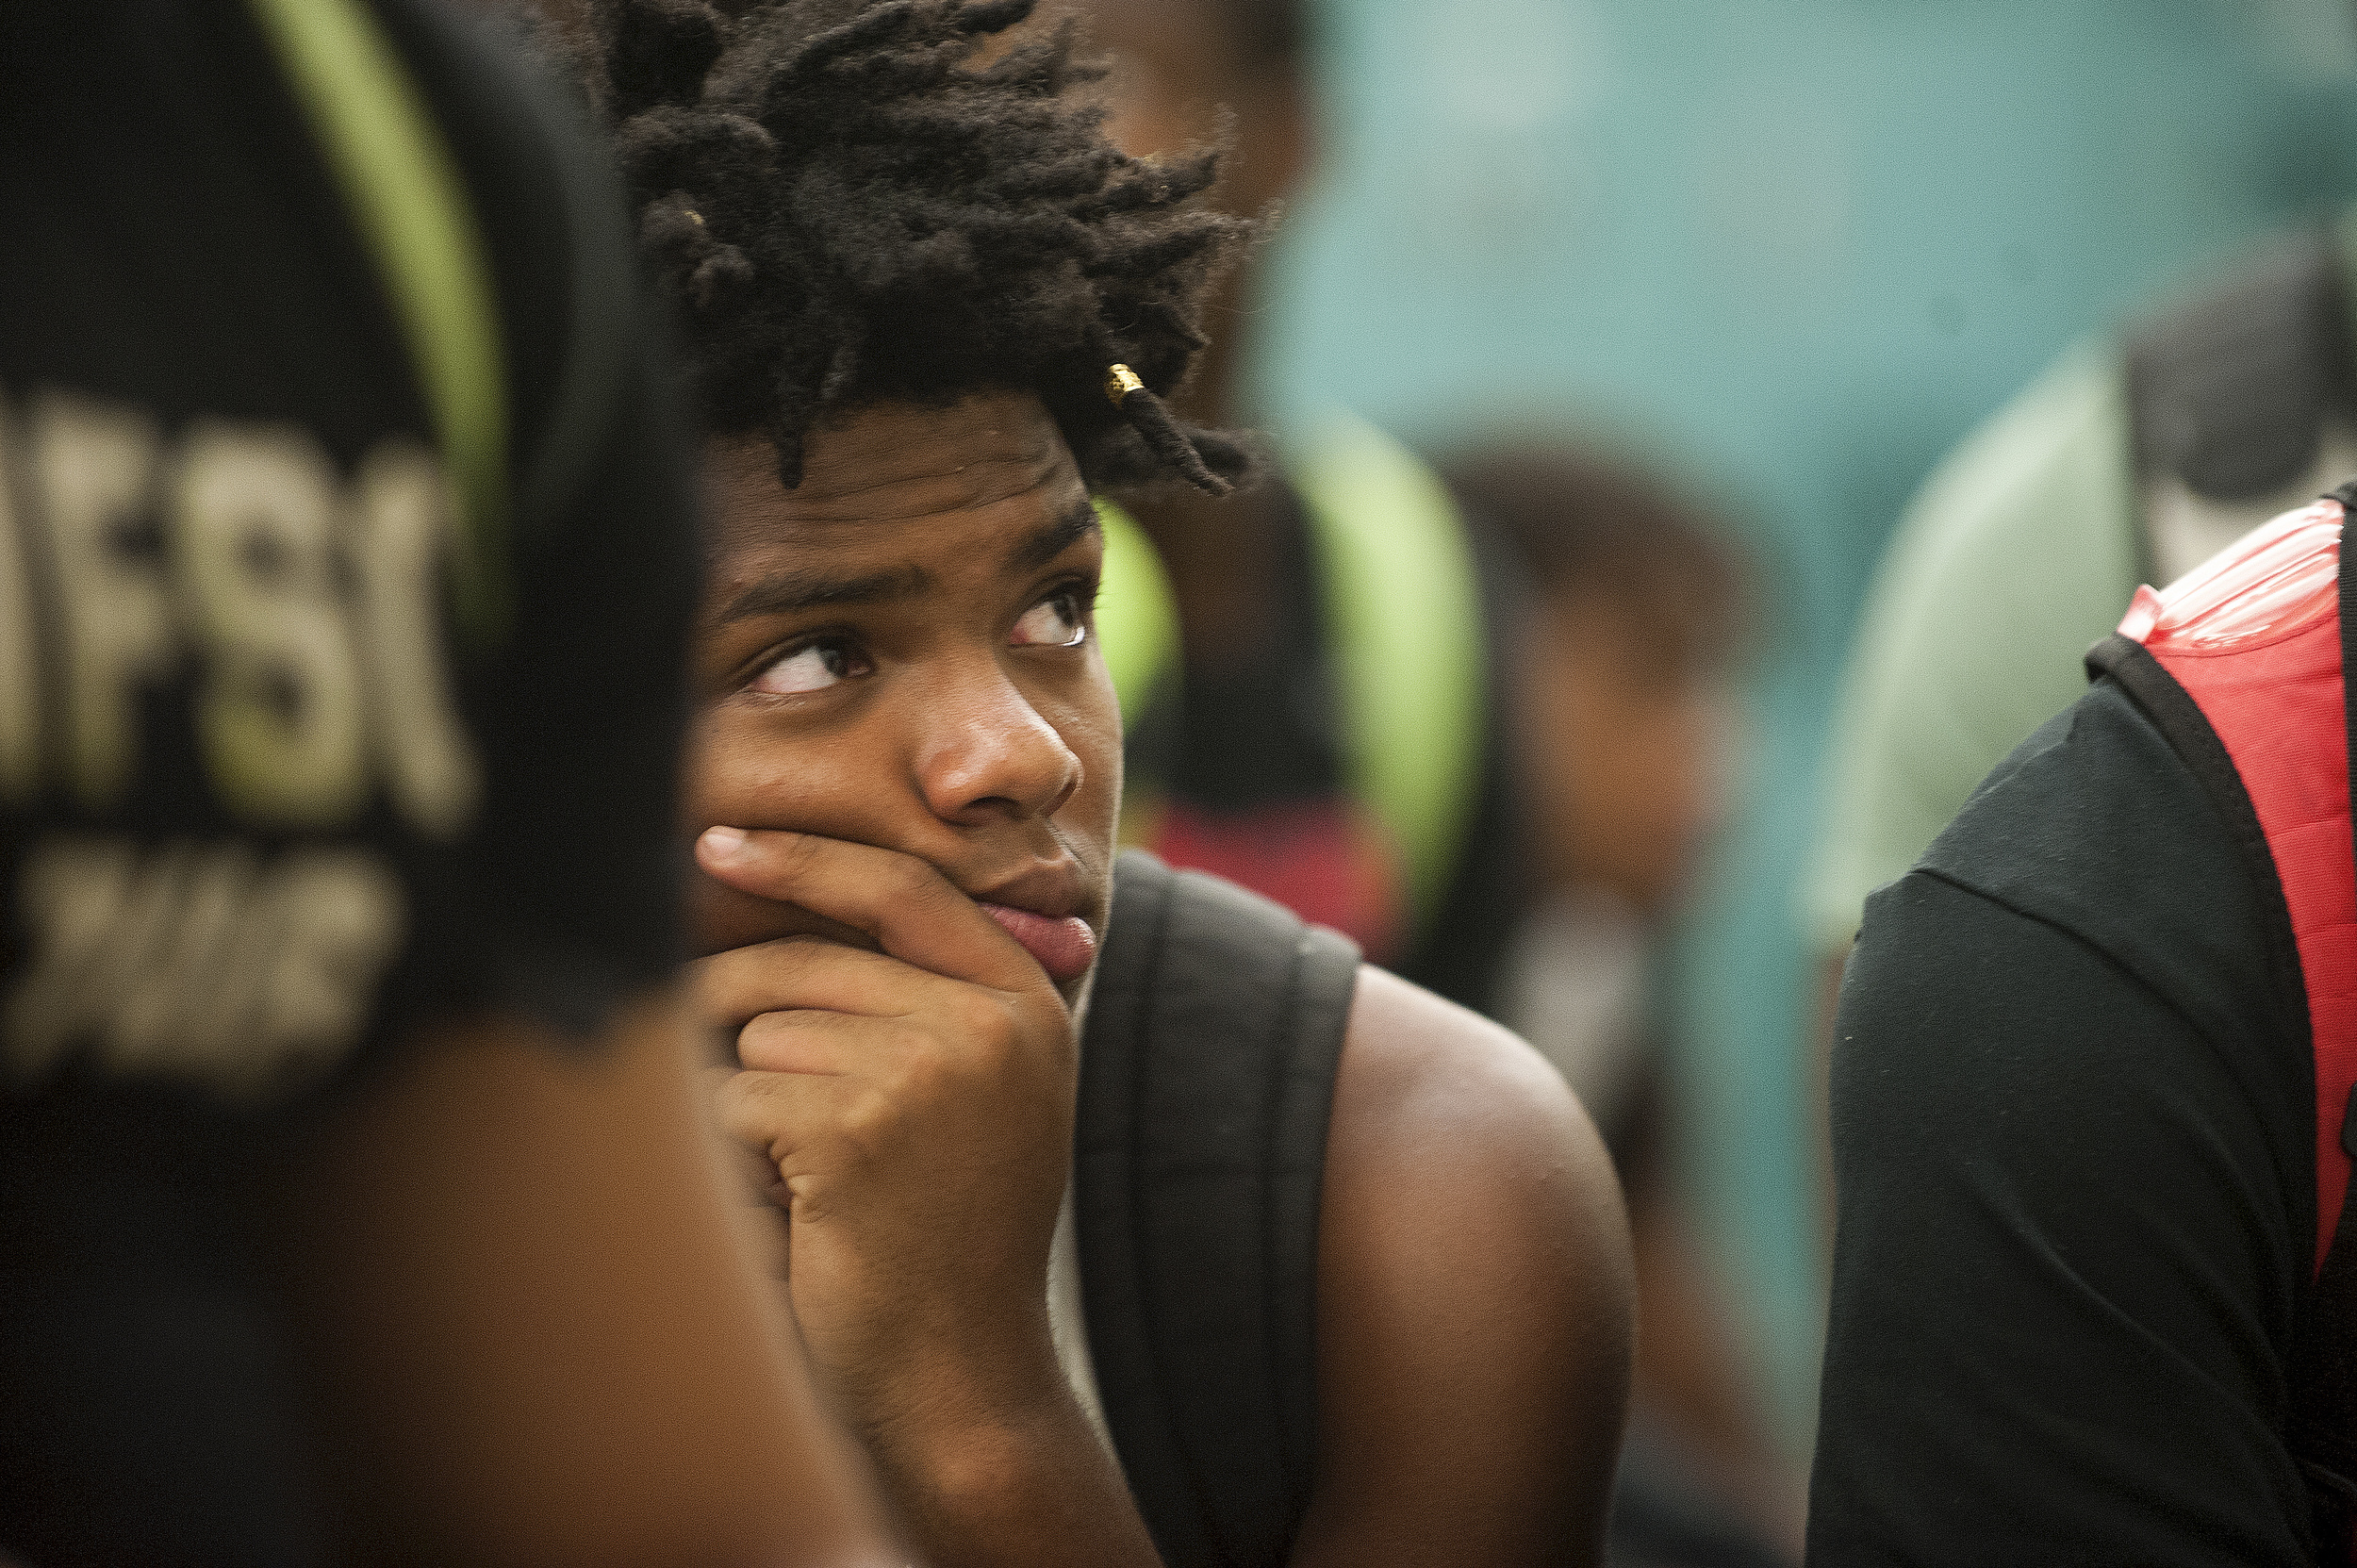  Flanagan high school freshman Tony Bordeaux Jr. listens to his coach talk during the first practice of the high school football season at Flanagan High School on Monday, Aug. 1, 2016. The reigning state champions look to repeat again despite the los